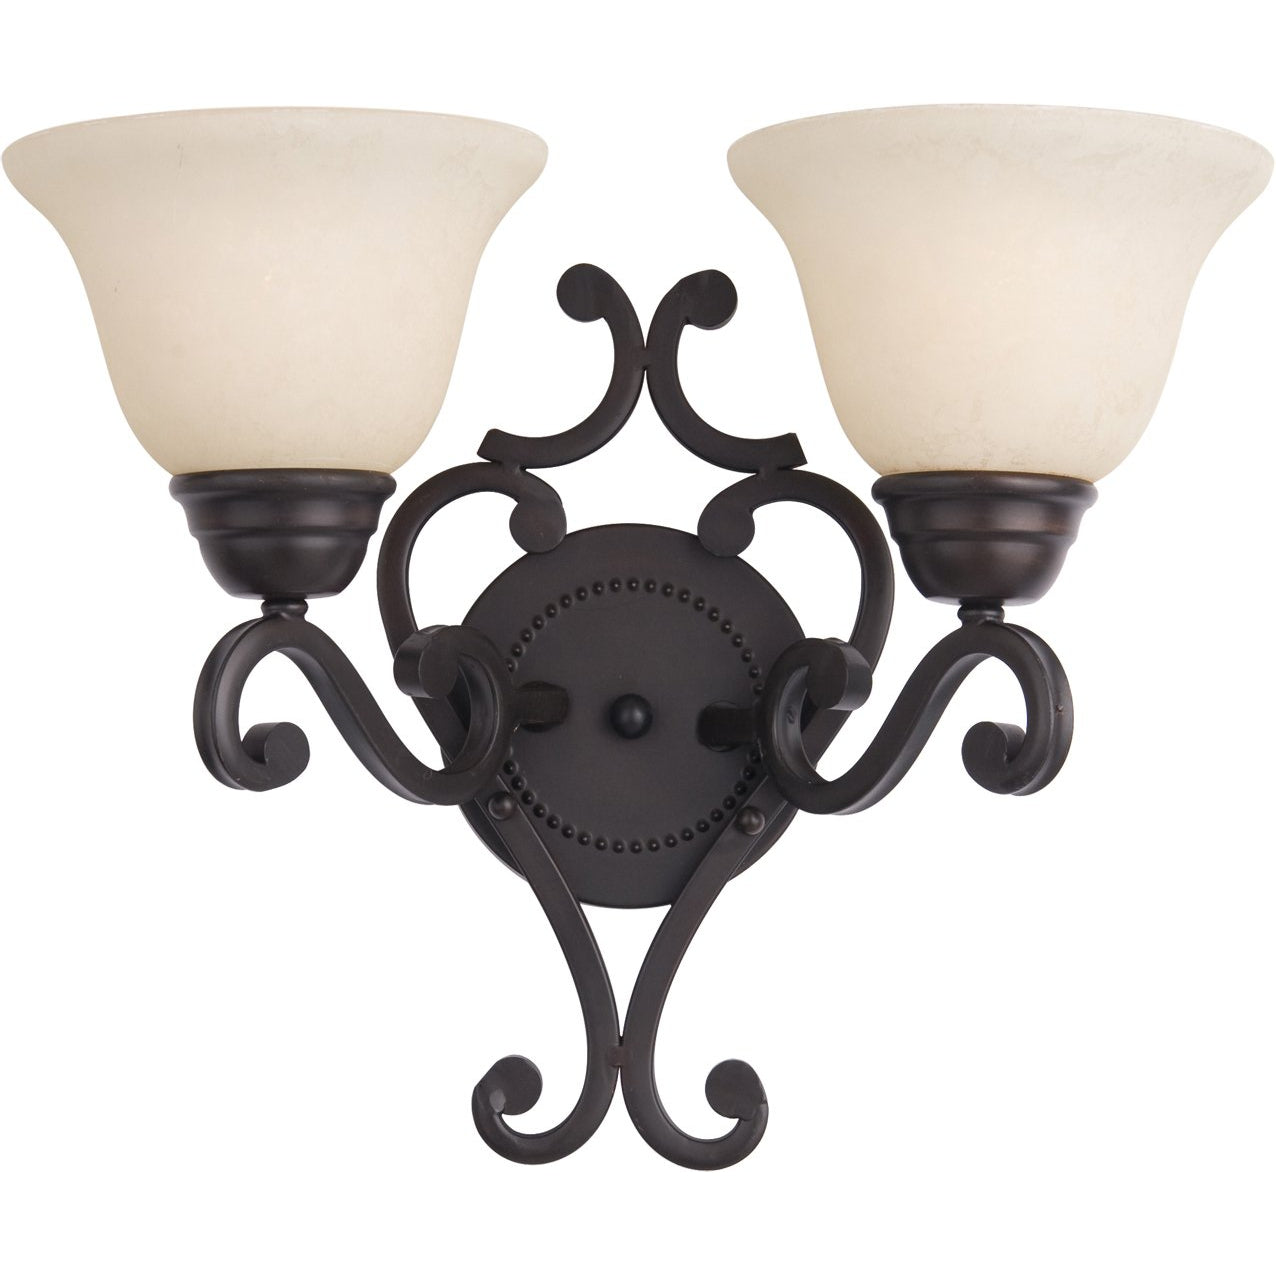 Manor Sconce Oil Rubbed Bronze